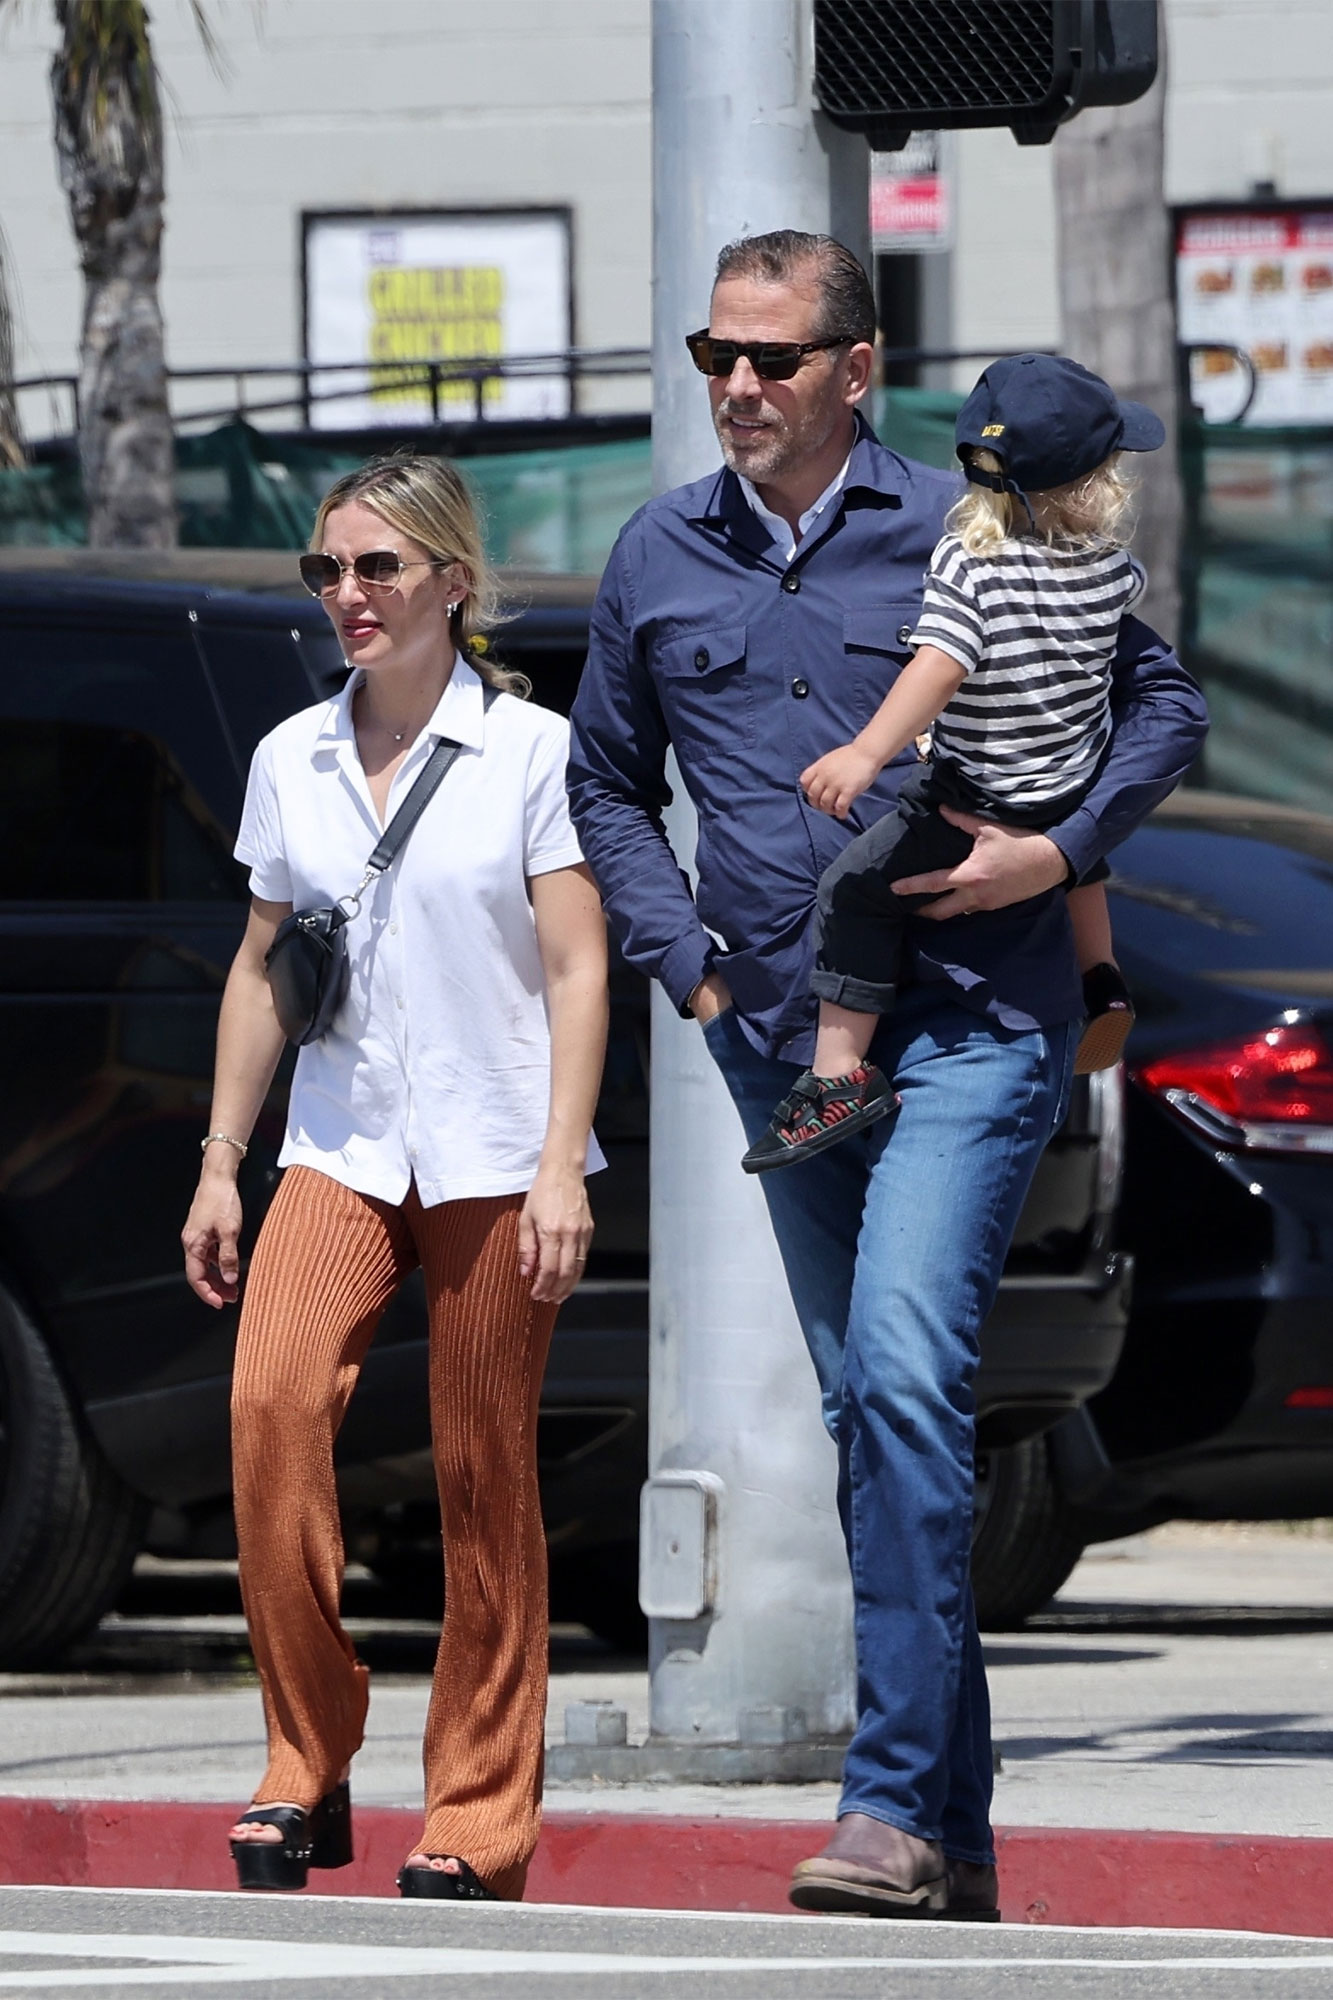 Hunter Biden spotted with wife Melissa Cohen and son amid reports of